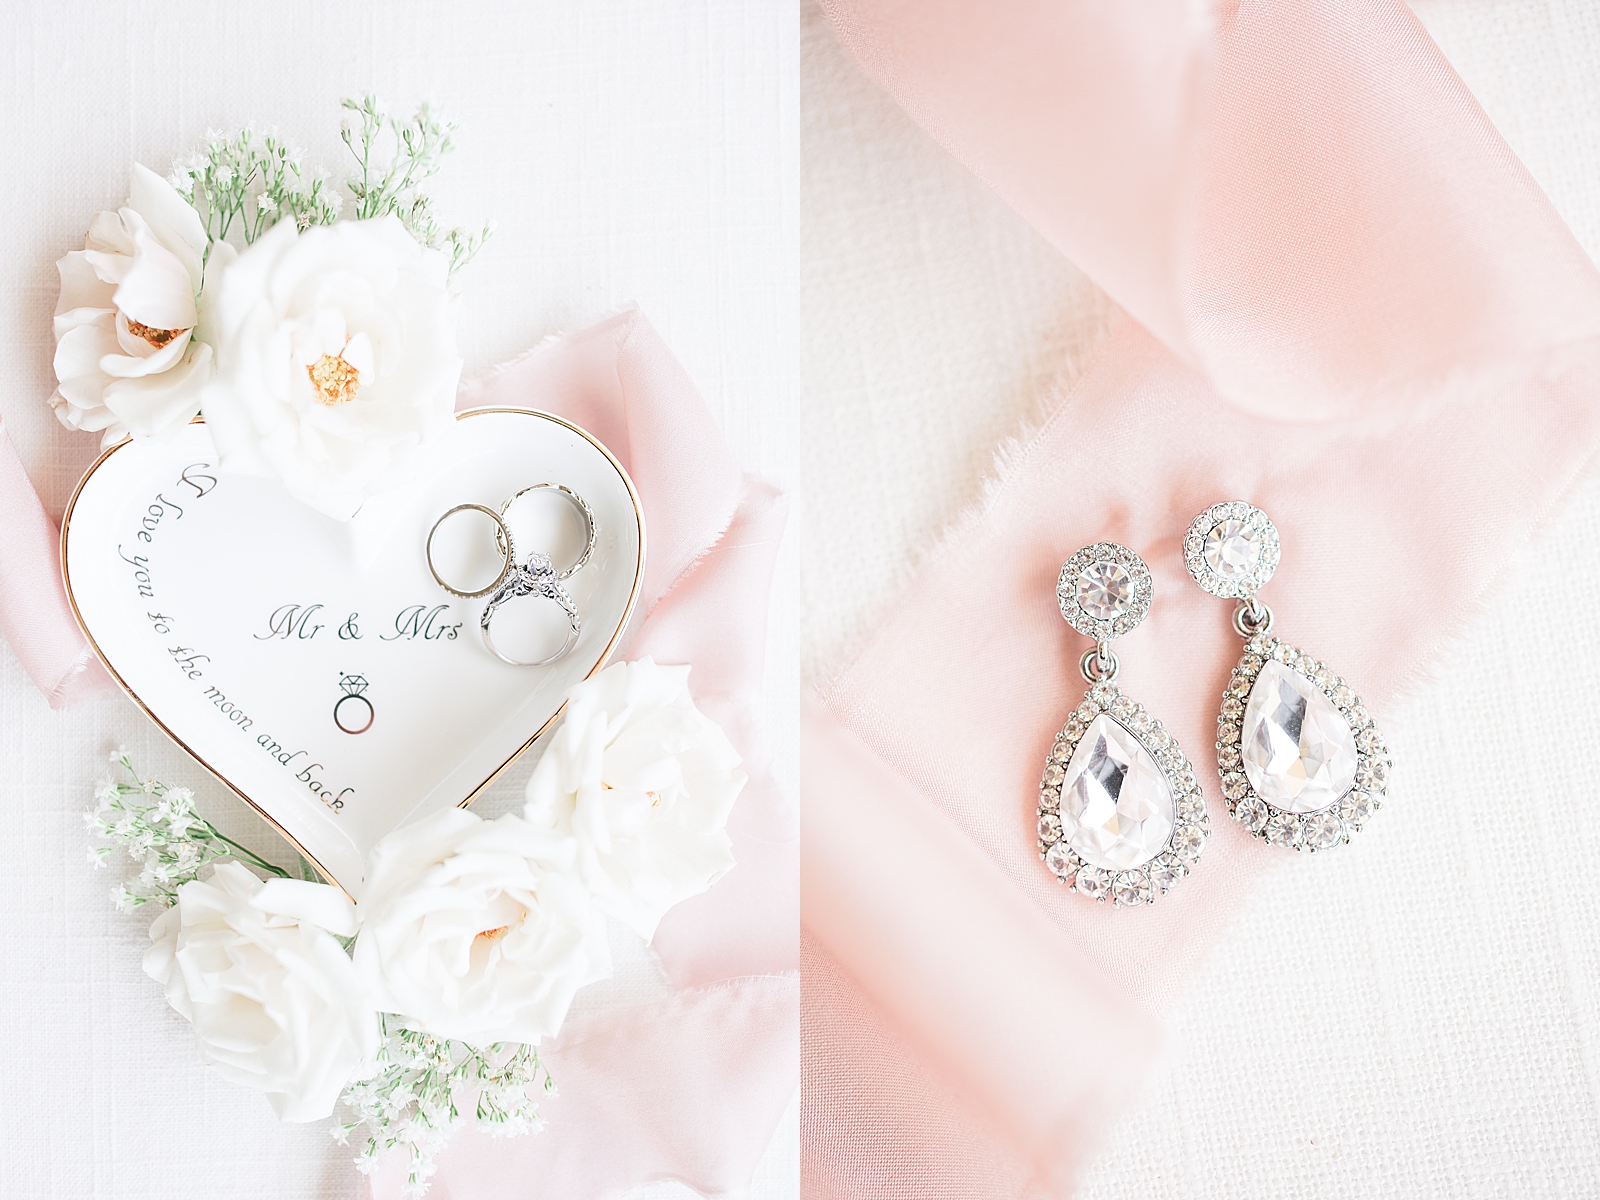 Rumbling Bald Resort Wedding Rings in a heart shaped white dish and earrings on pink ribbon Photos